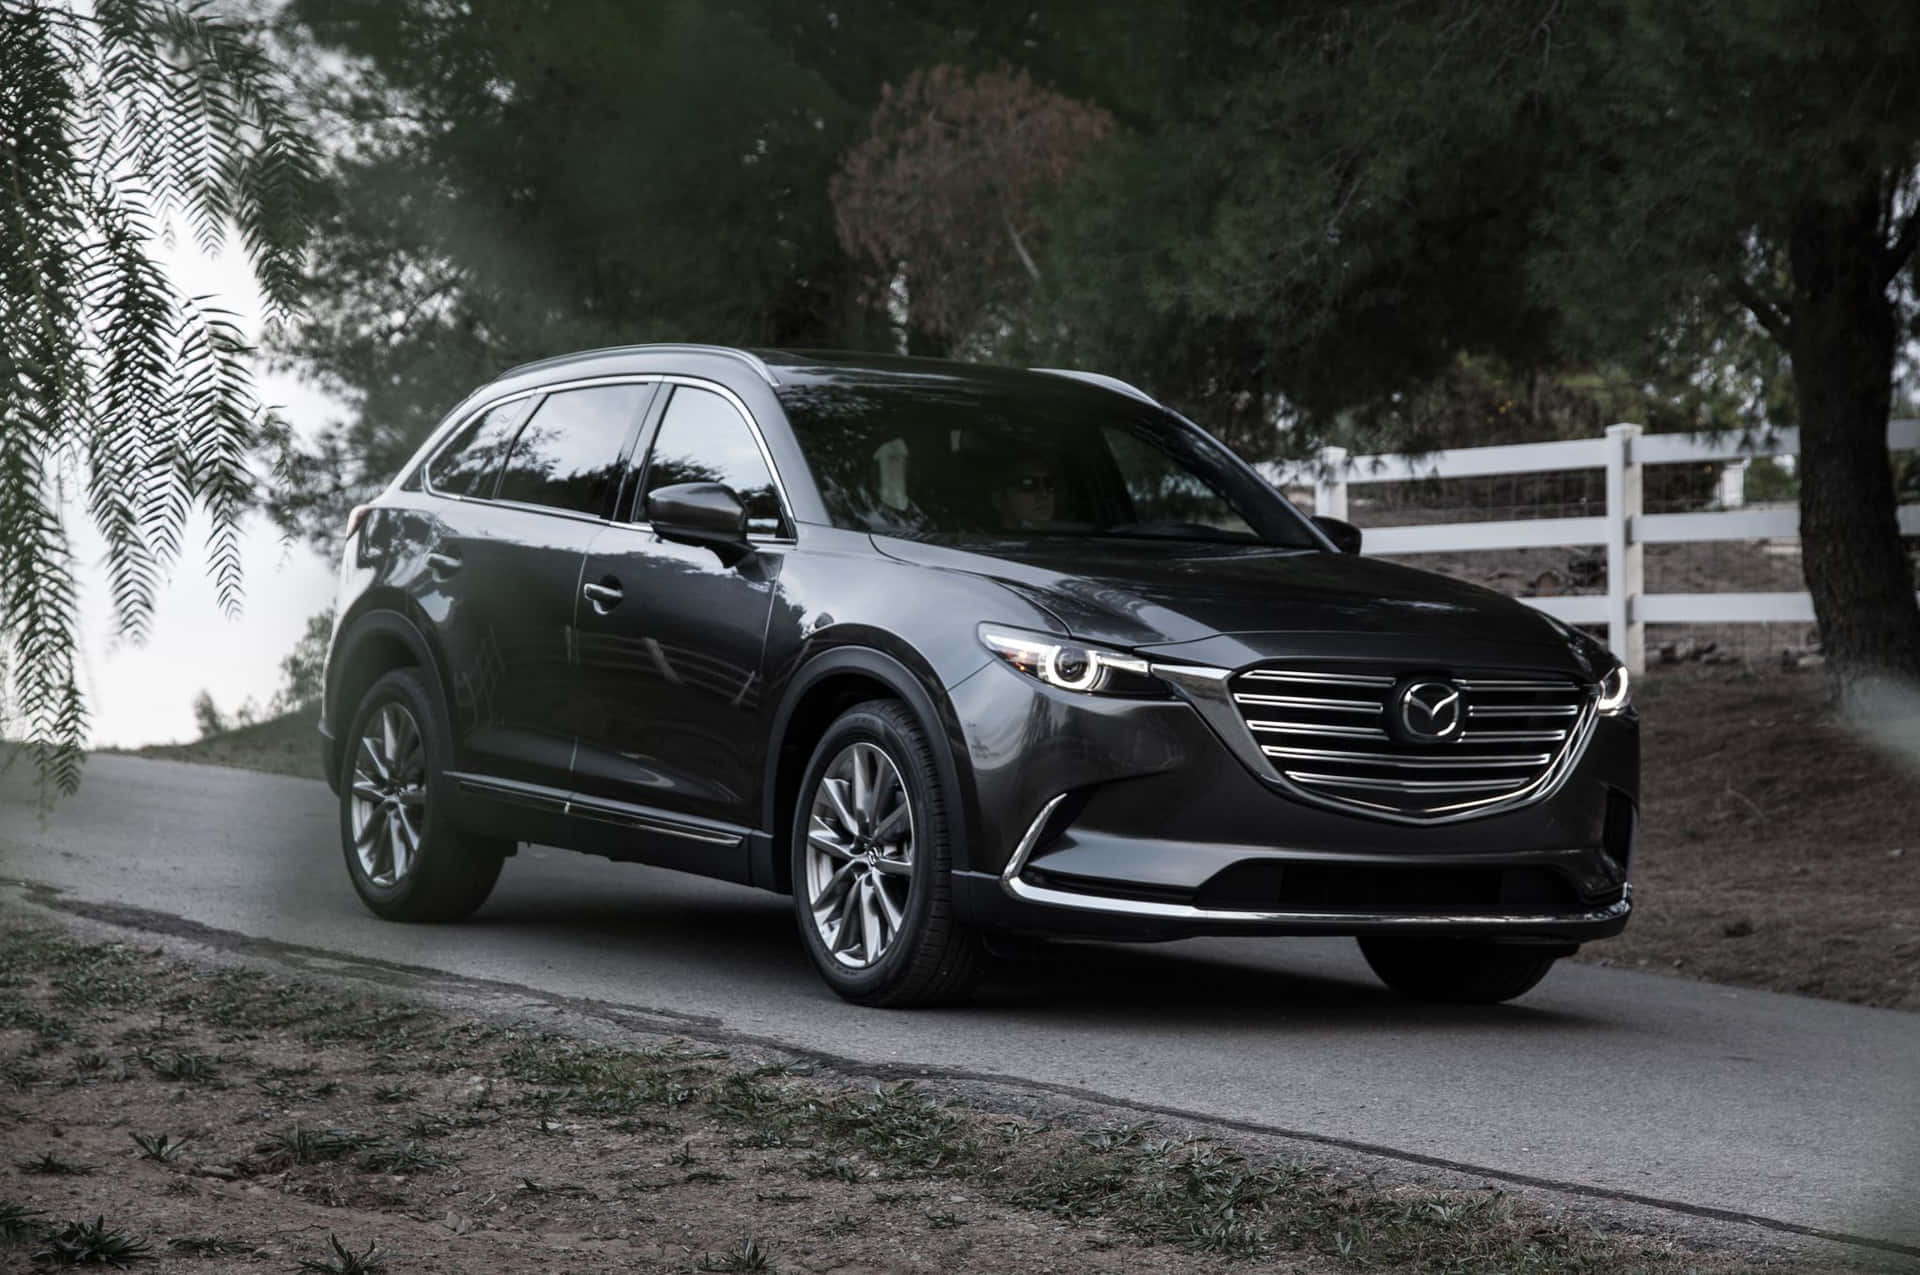 Sleek and Stylish Mazda CX-9 in Action Wallpaper